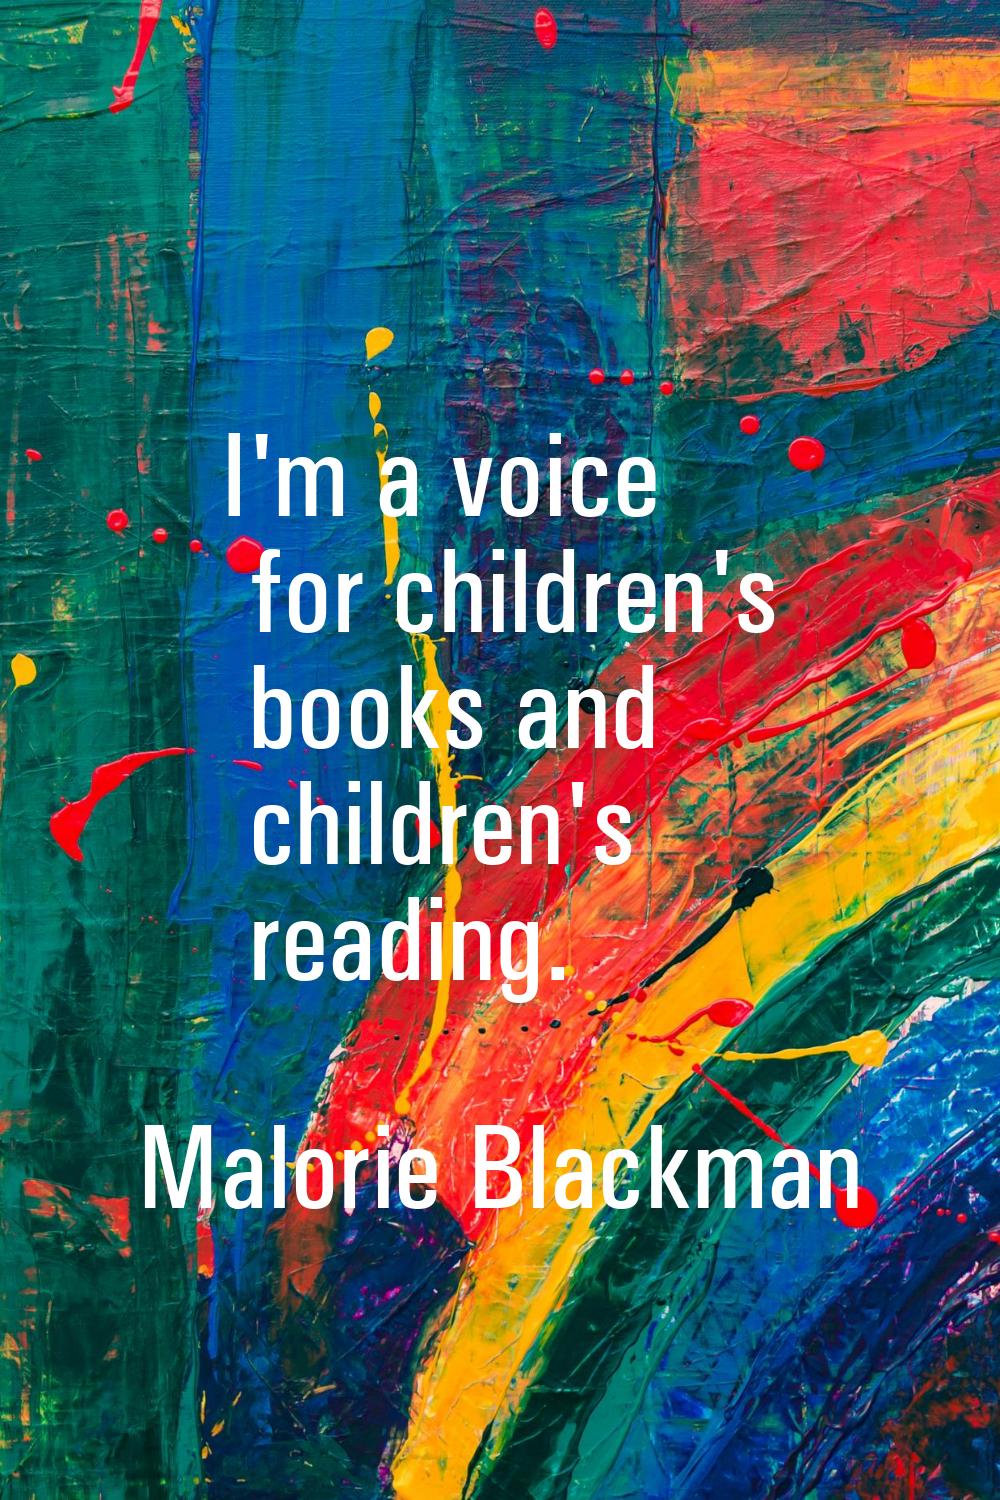 I'm a voice for children's books and children's reading.